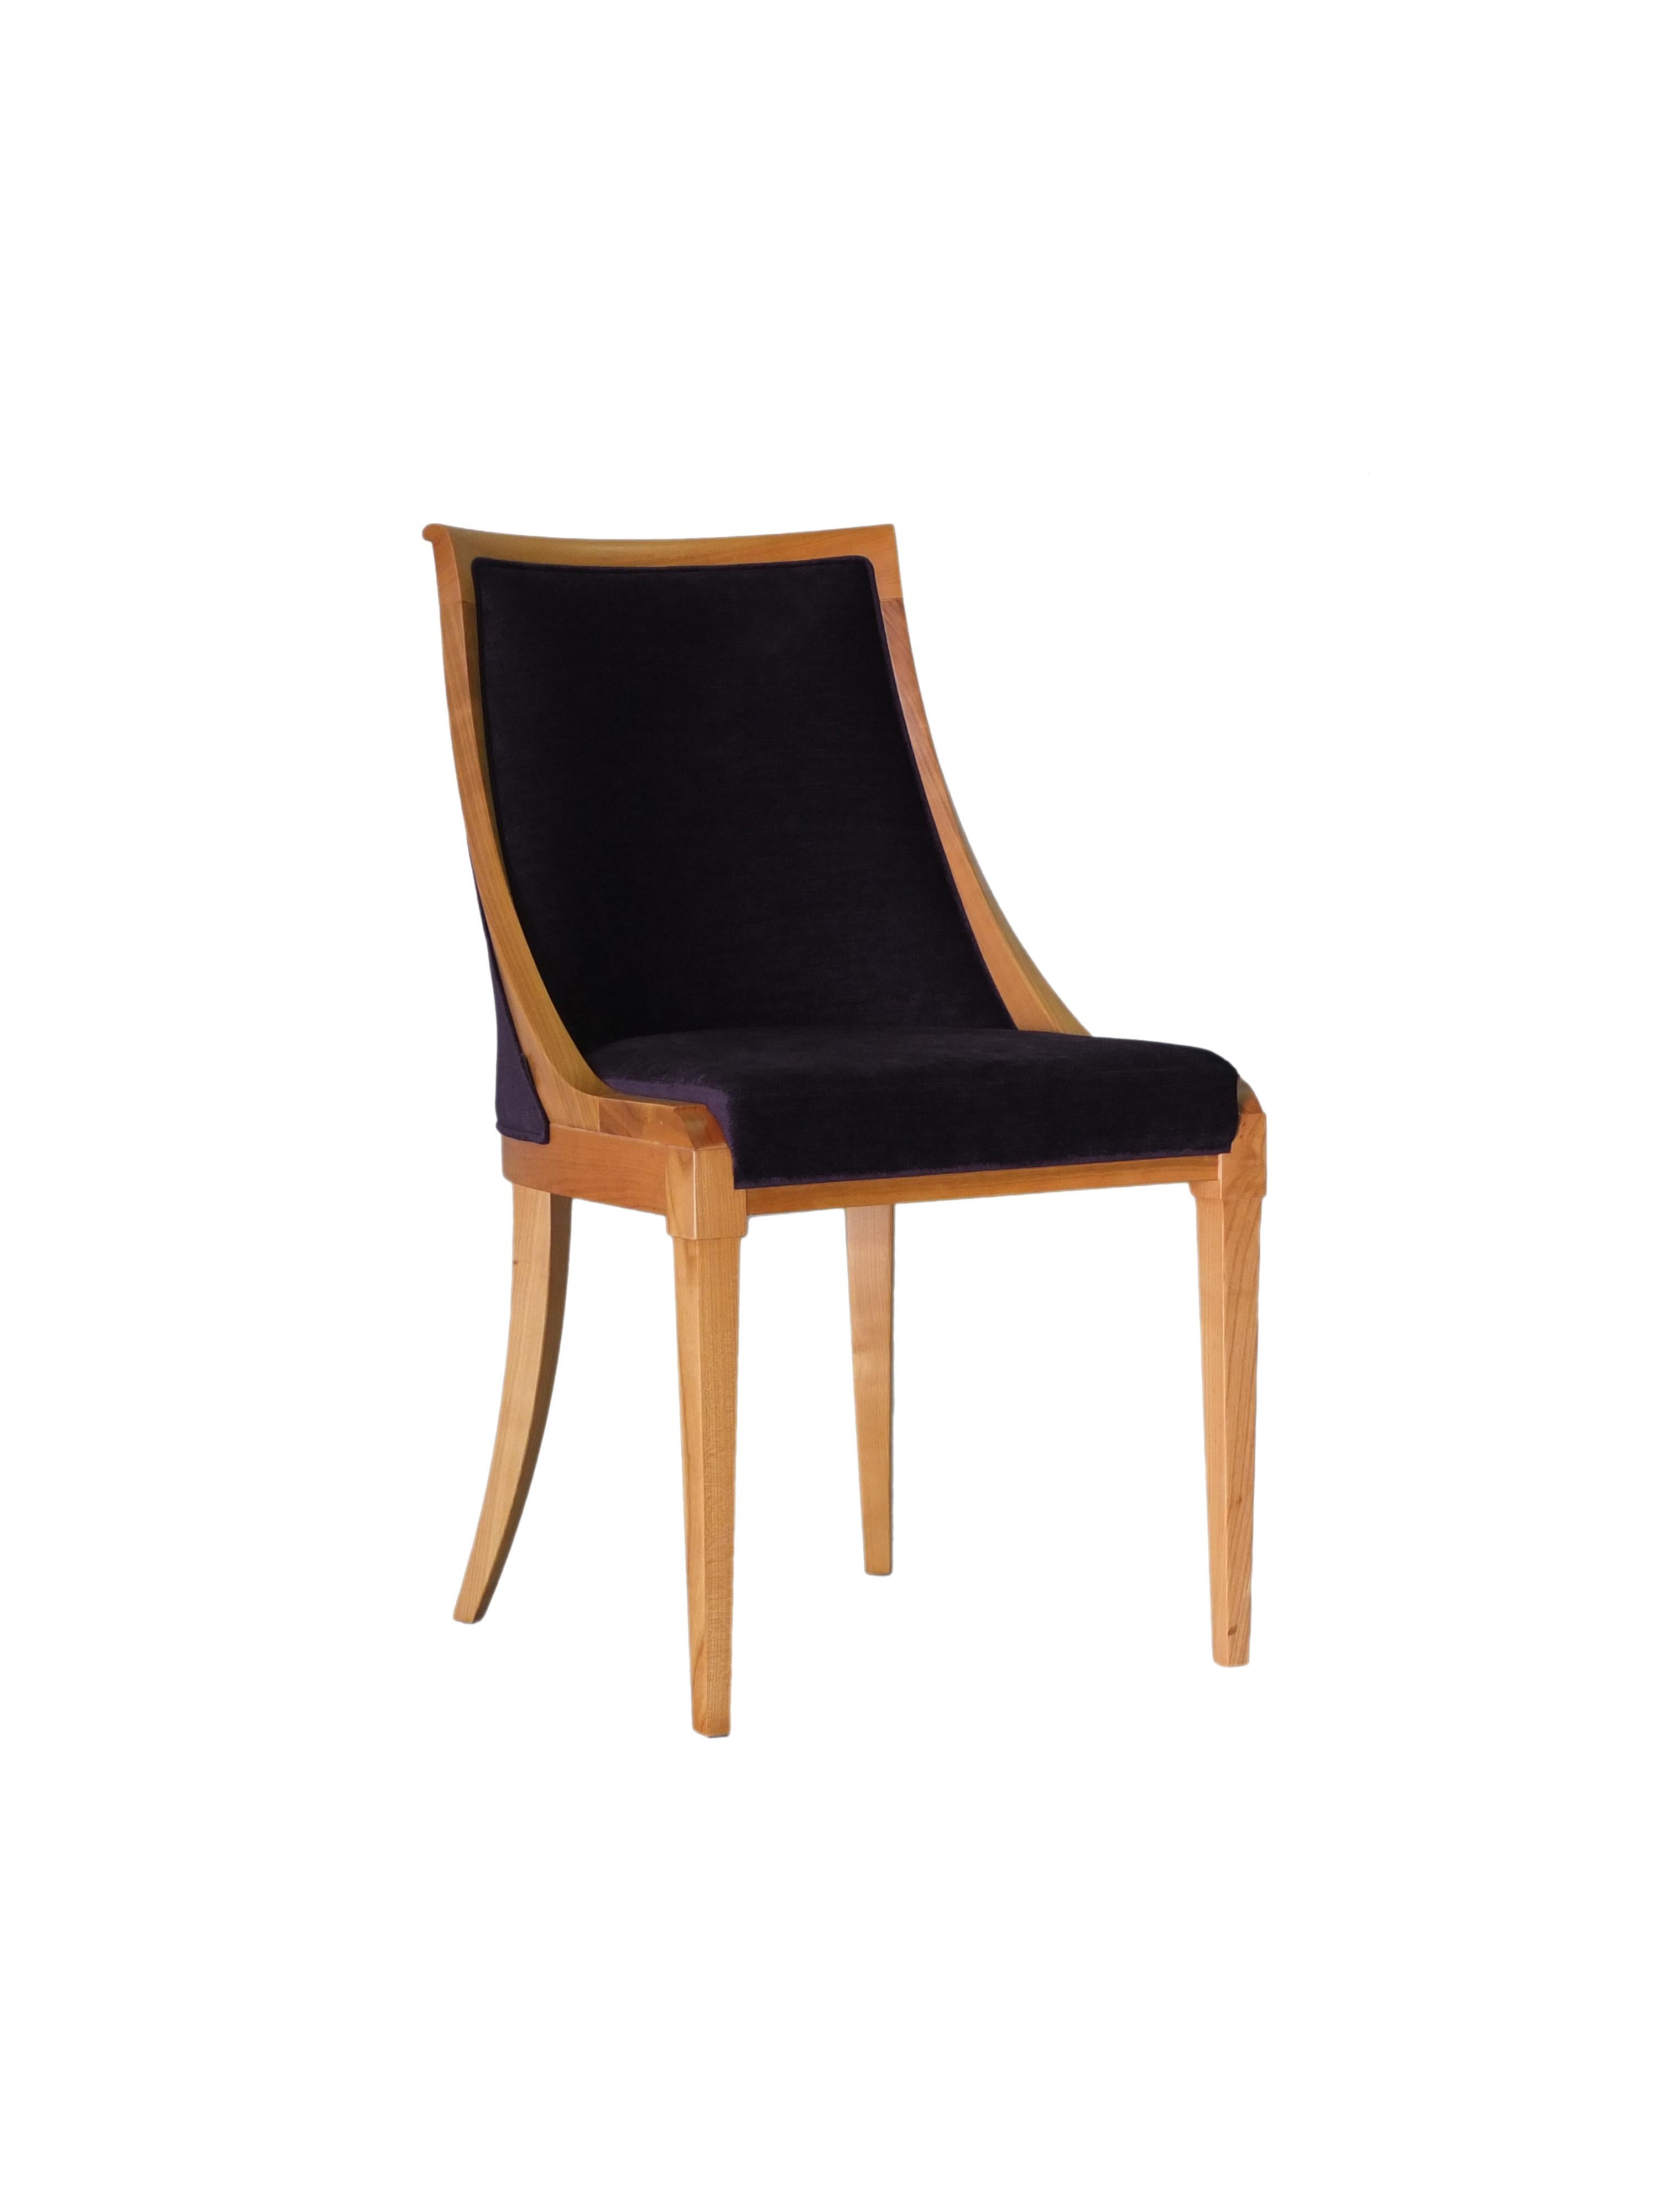 Italian Musa, Upholstered Chair Made of Cherrywood